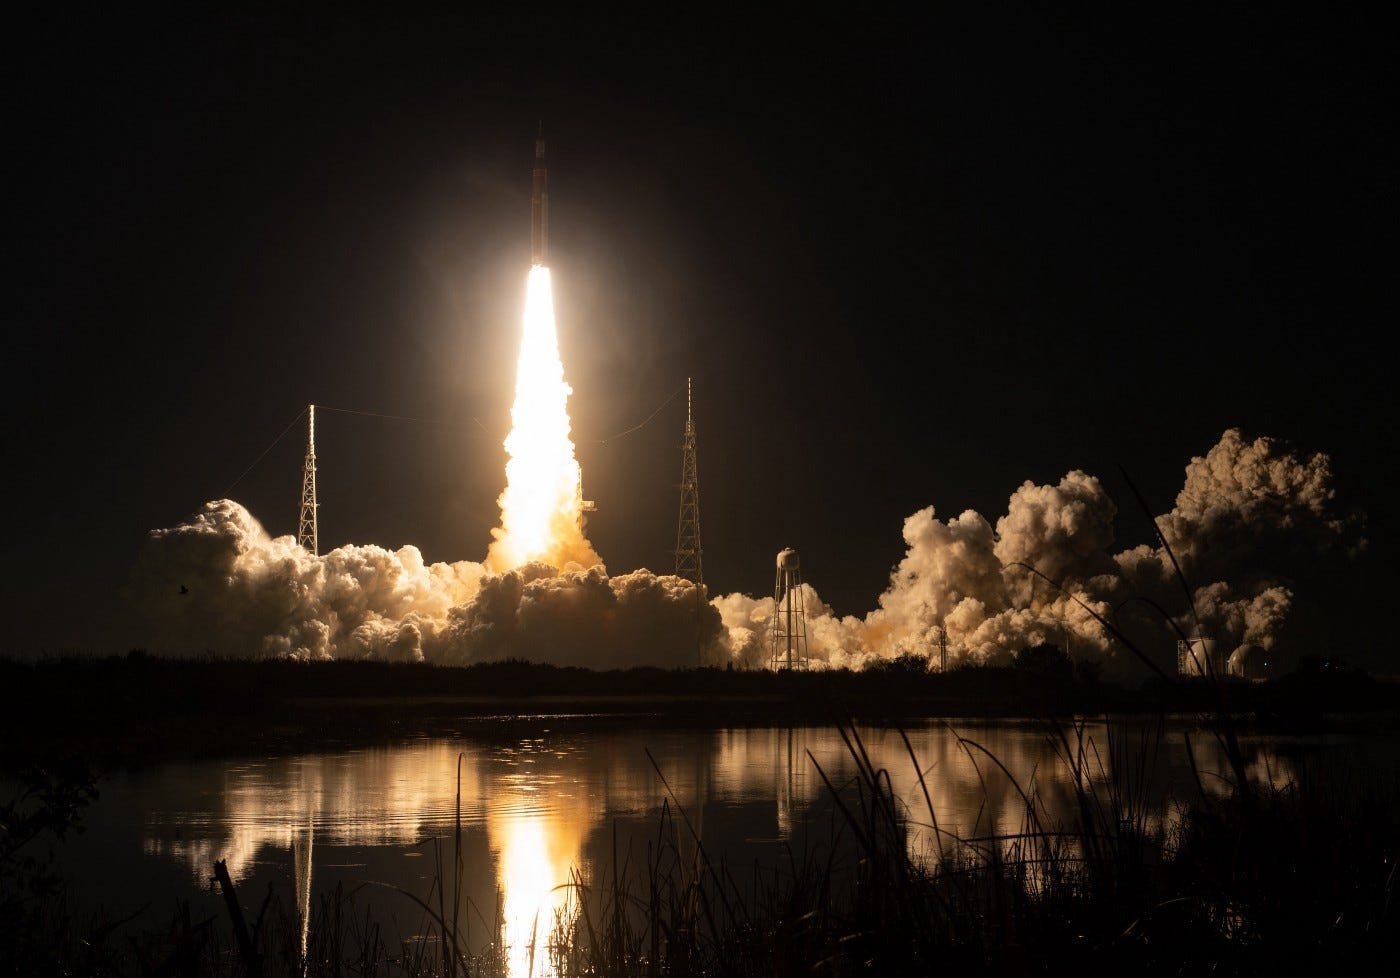 NASA’s Space Launch System rocket carrying the Orion spacecraft launches on the Artemis I flight test